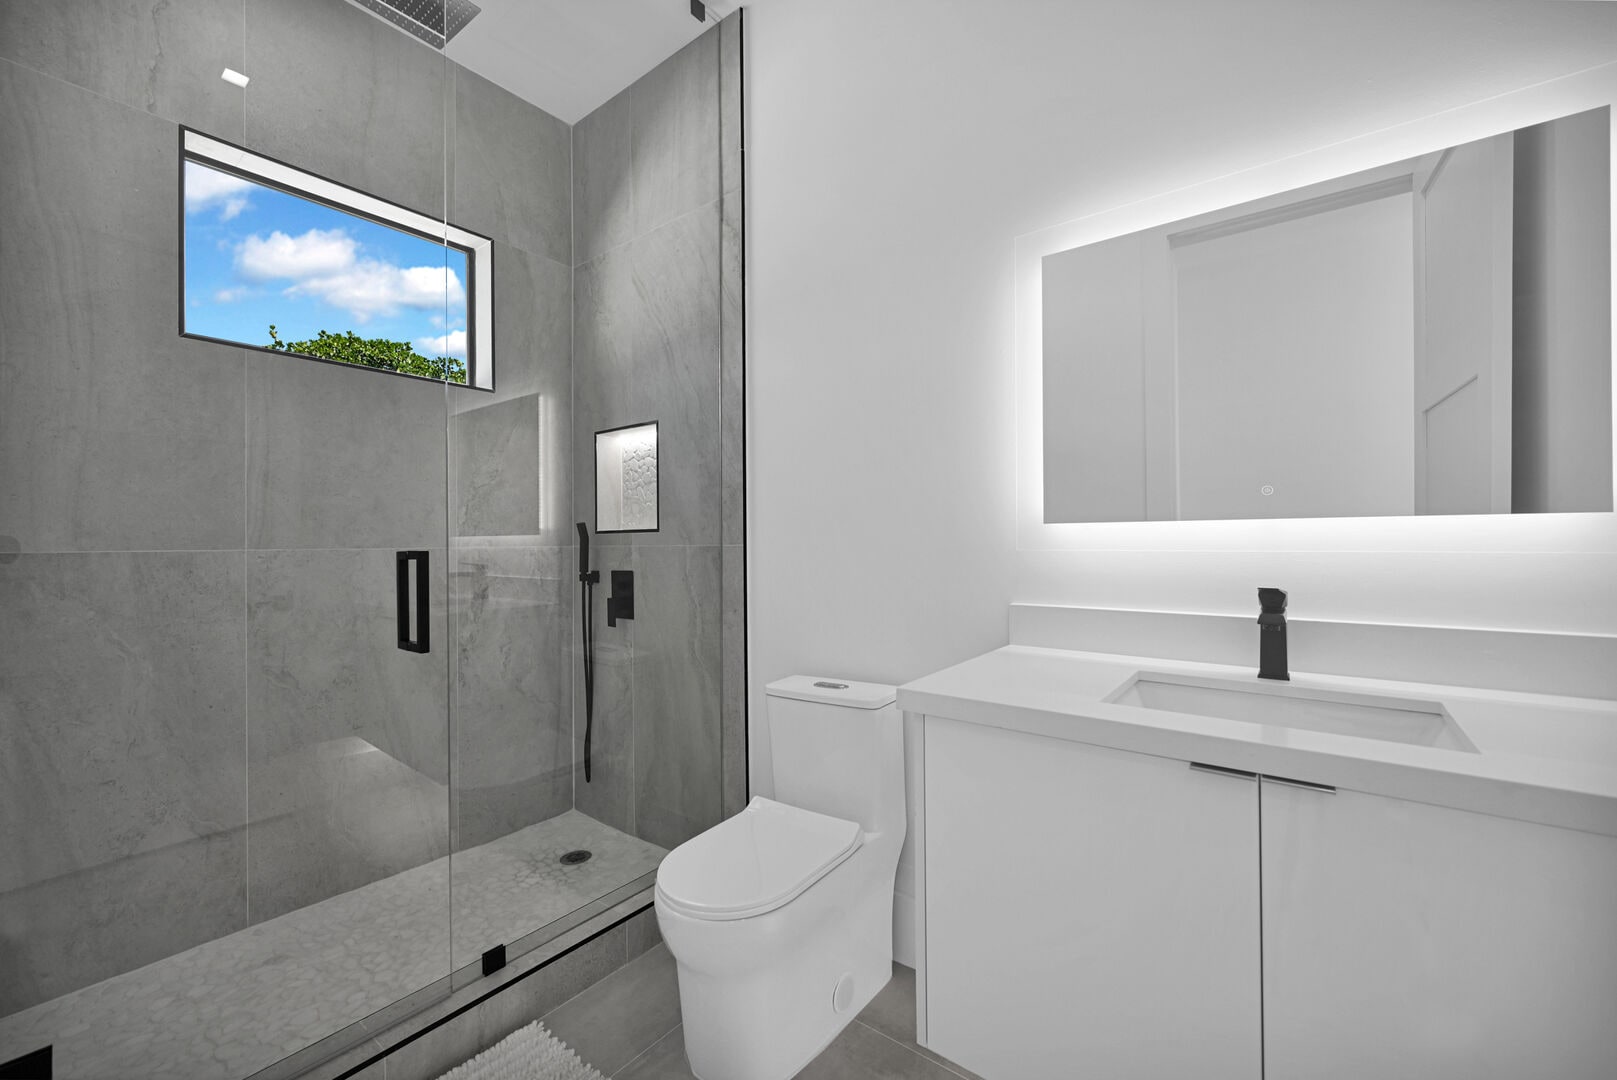 Guest bathroom
Ideally situated for bedrooms 2 & 3